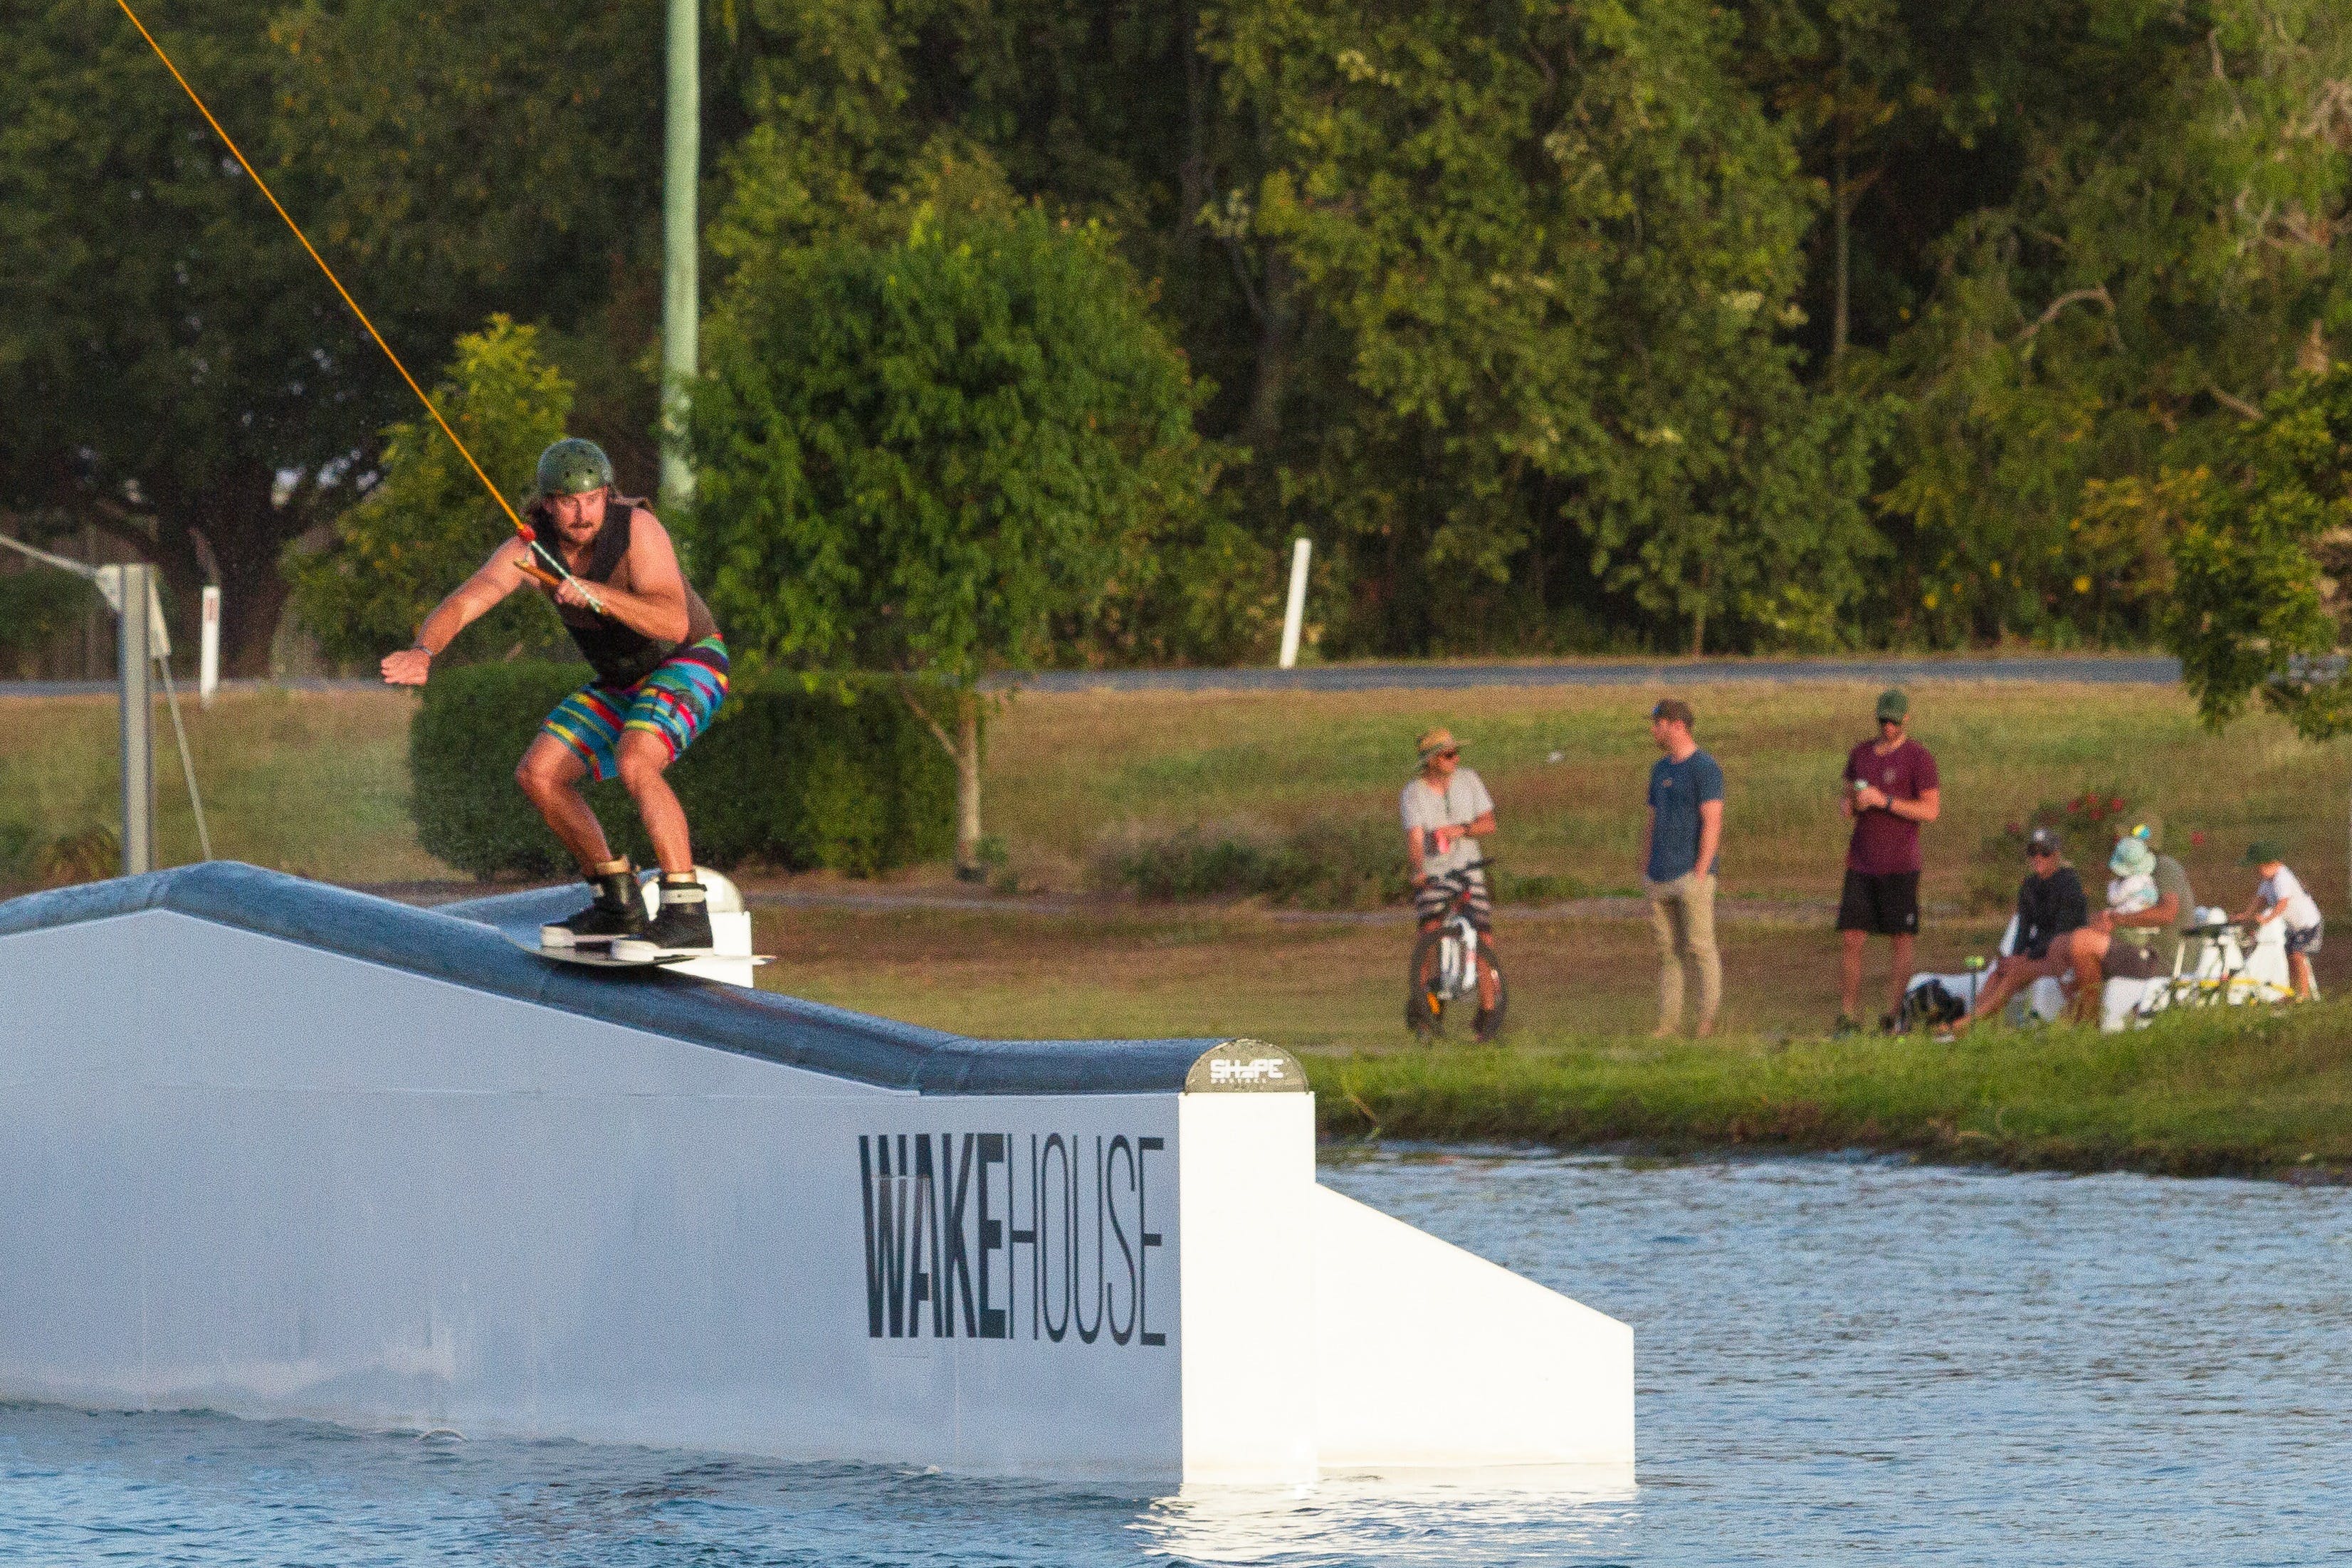 Cash for Tricks - Wakeboarding Comp - Dalby Accommodation